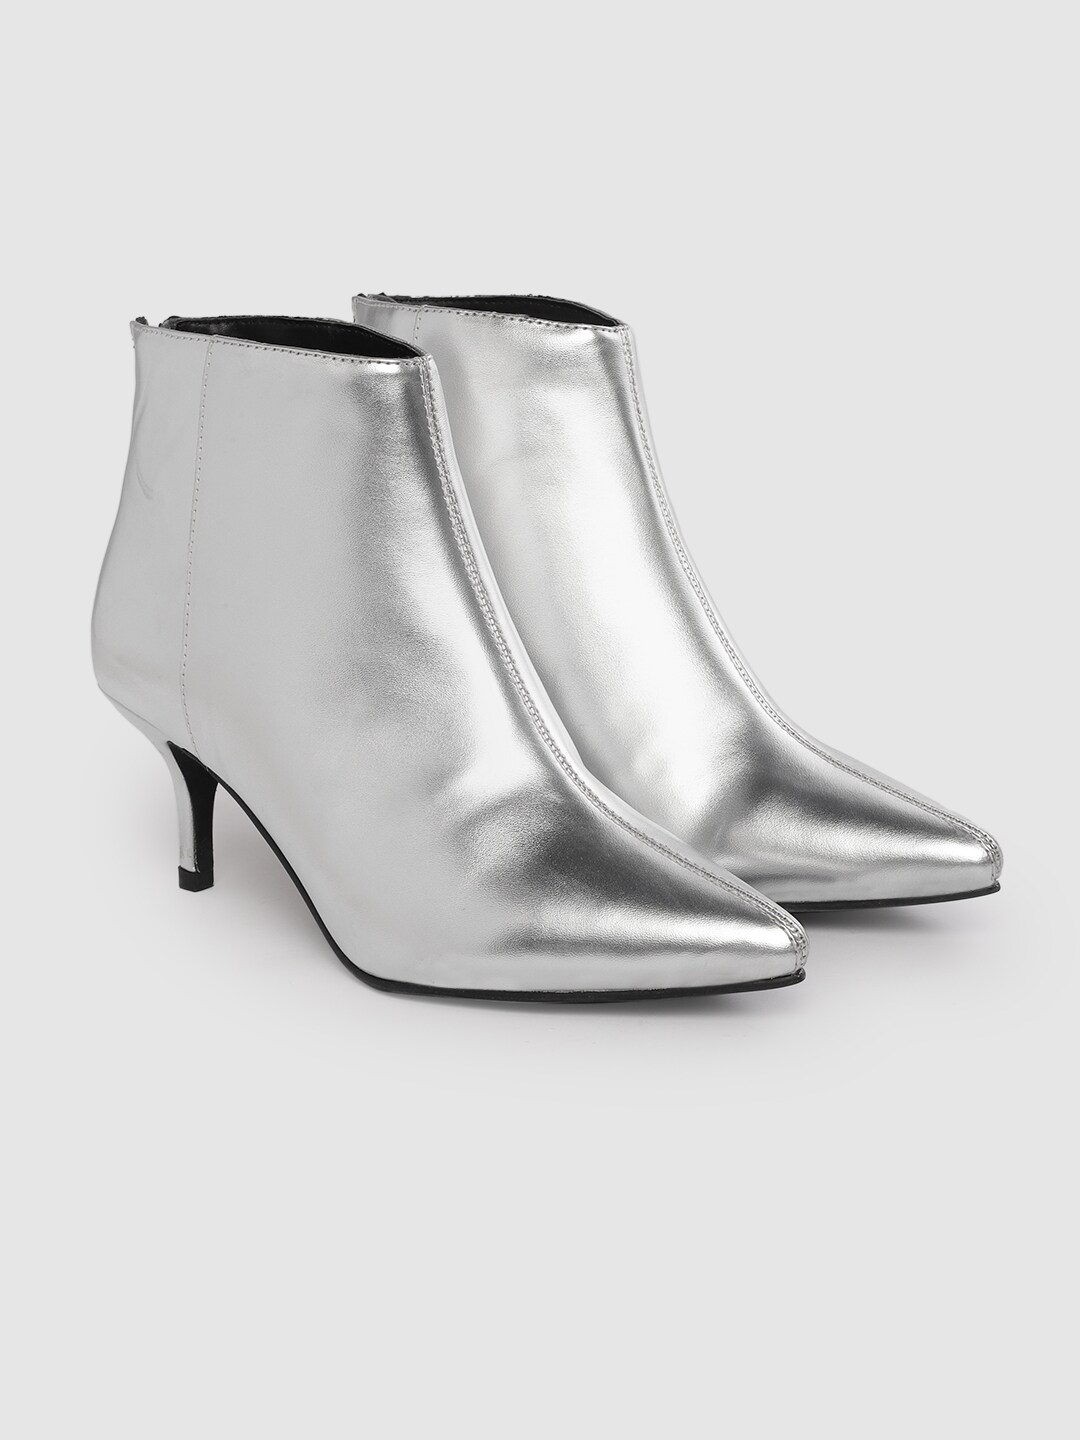 CORSICA Women Silver-Toned Solid Mid-Top Heeled Boots Price in India